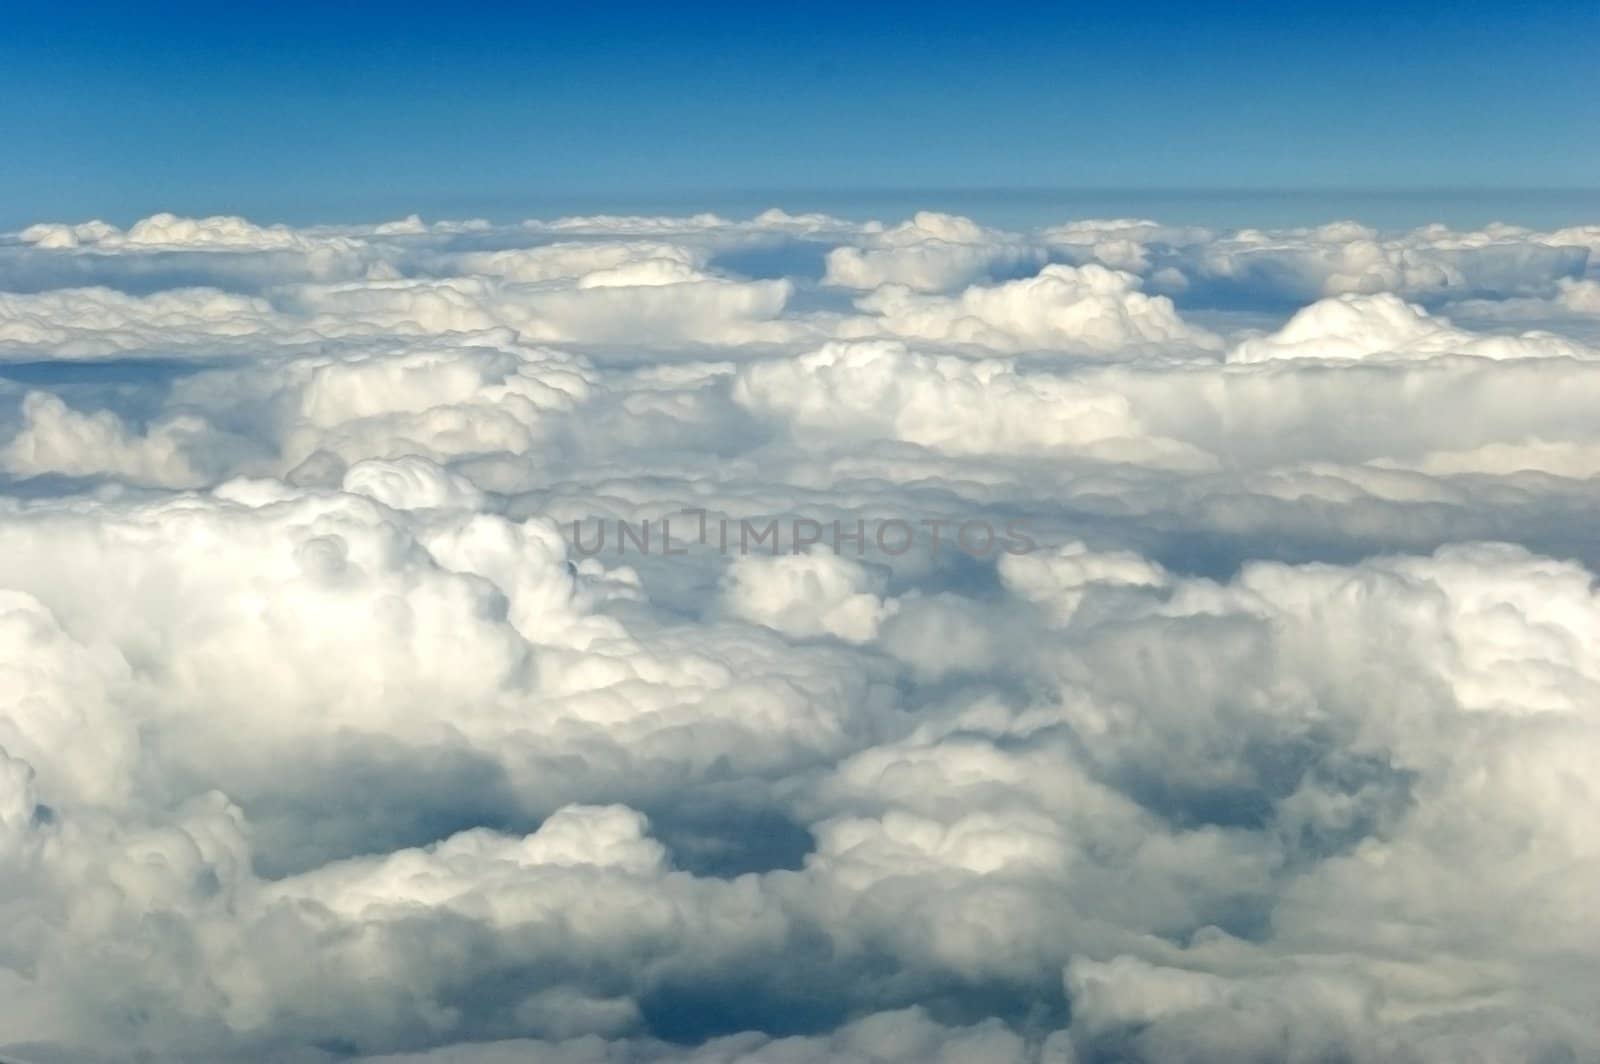 Blue sky with clouds, view from plane somewhere above Yunnan province in China.